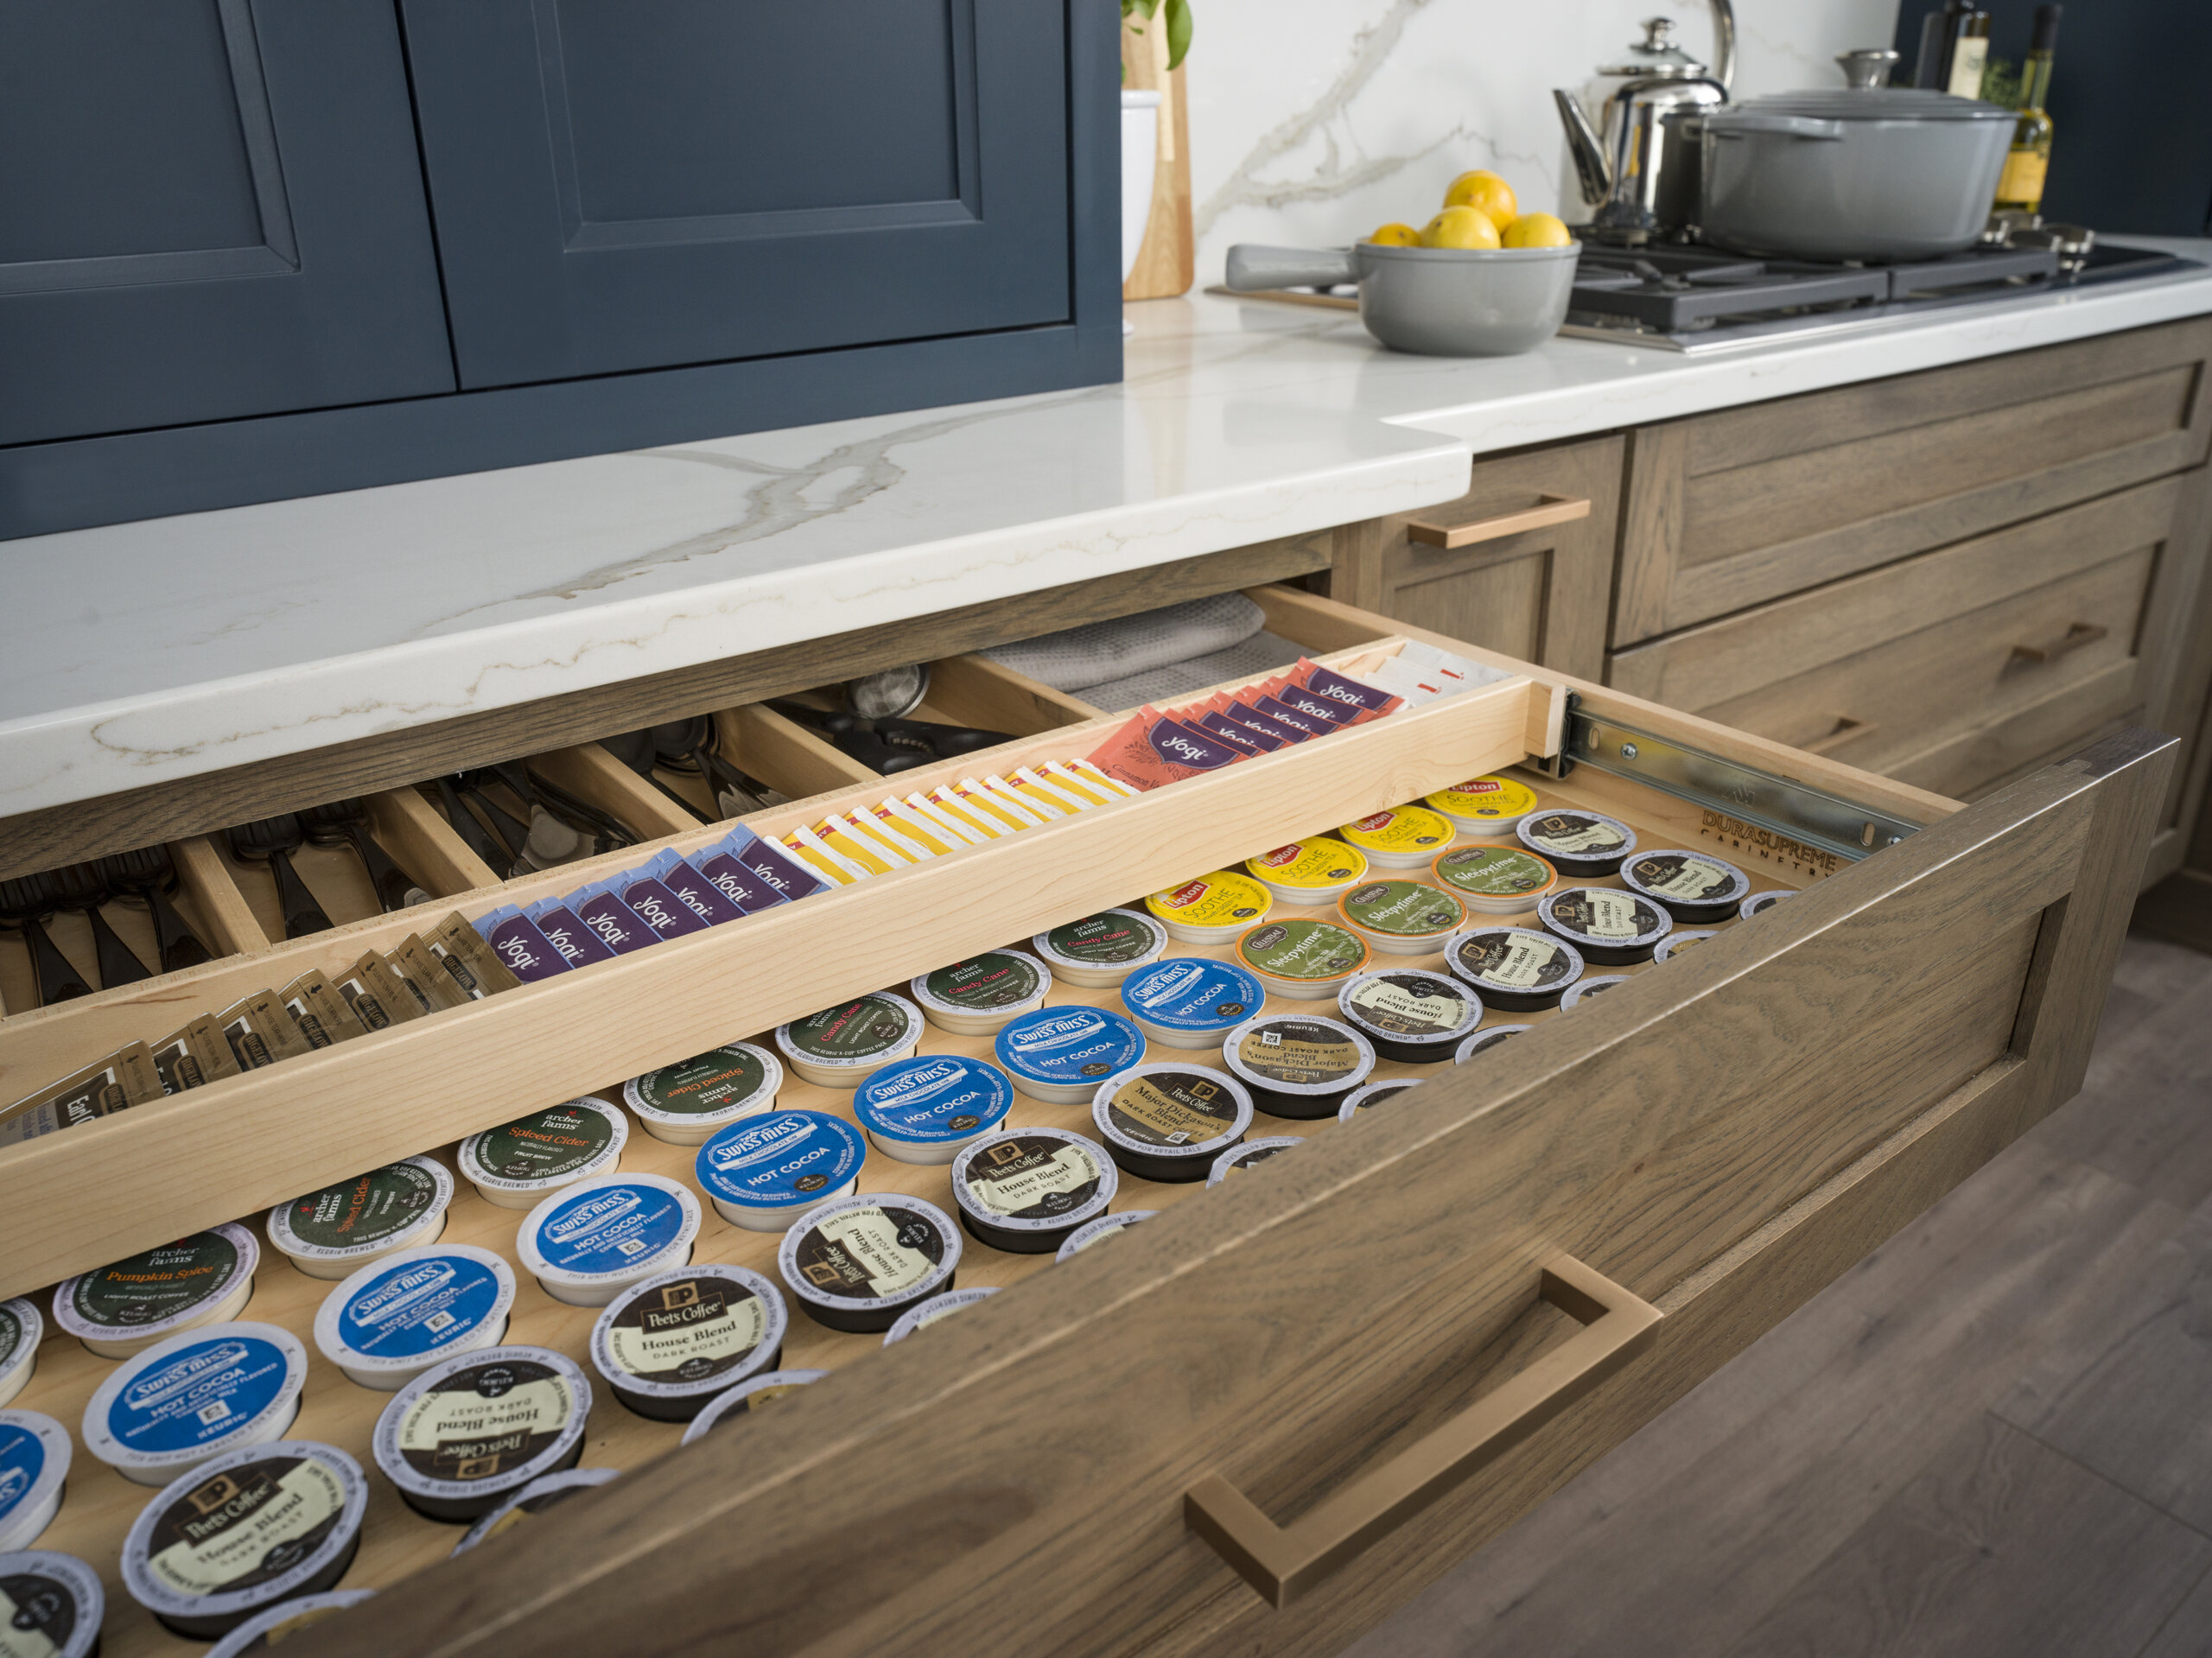 K-Cup Storage Drawer - Decora Cabinetry - Cabinet Interiors